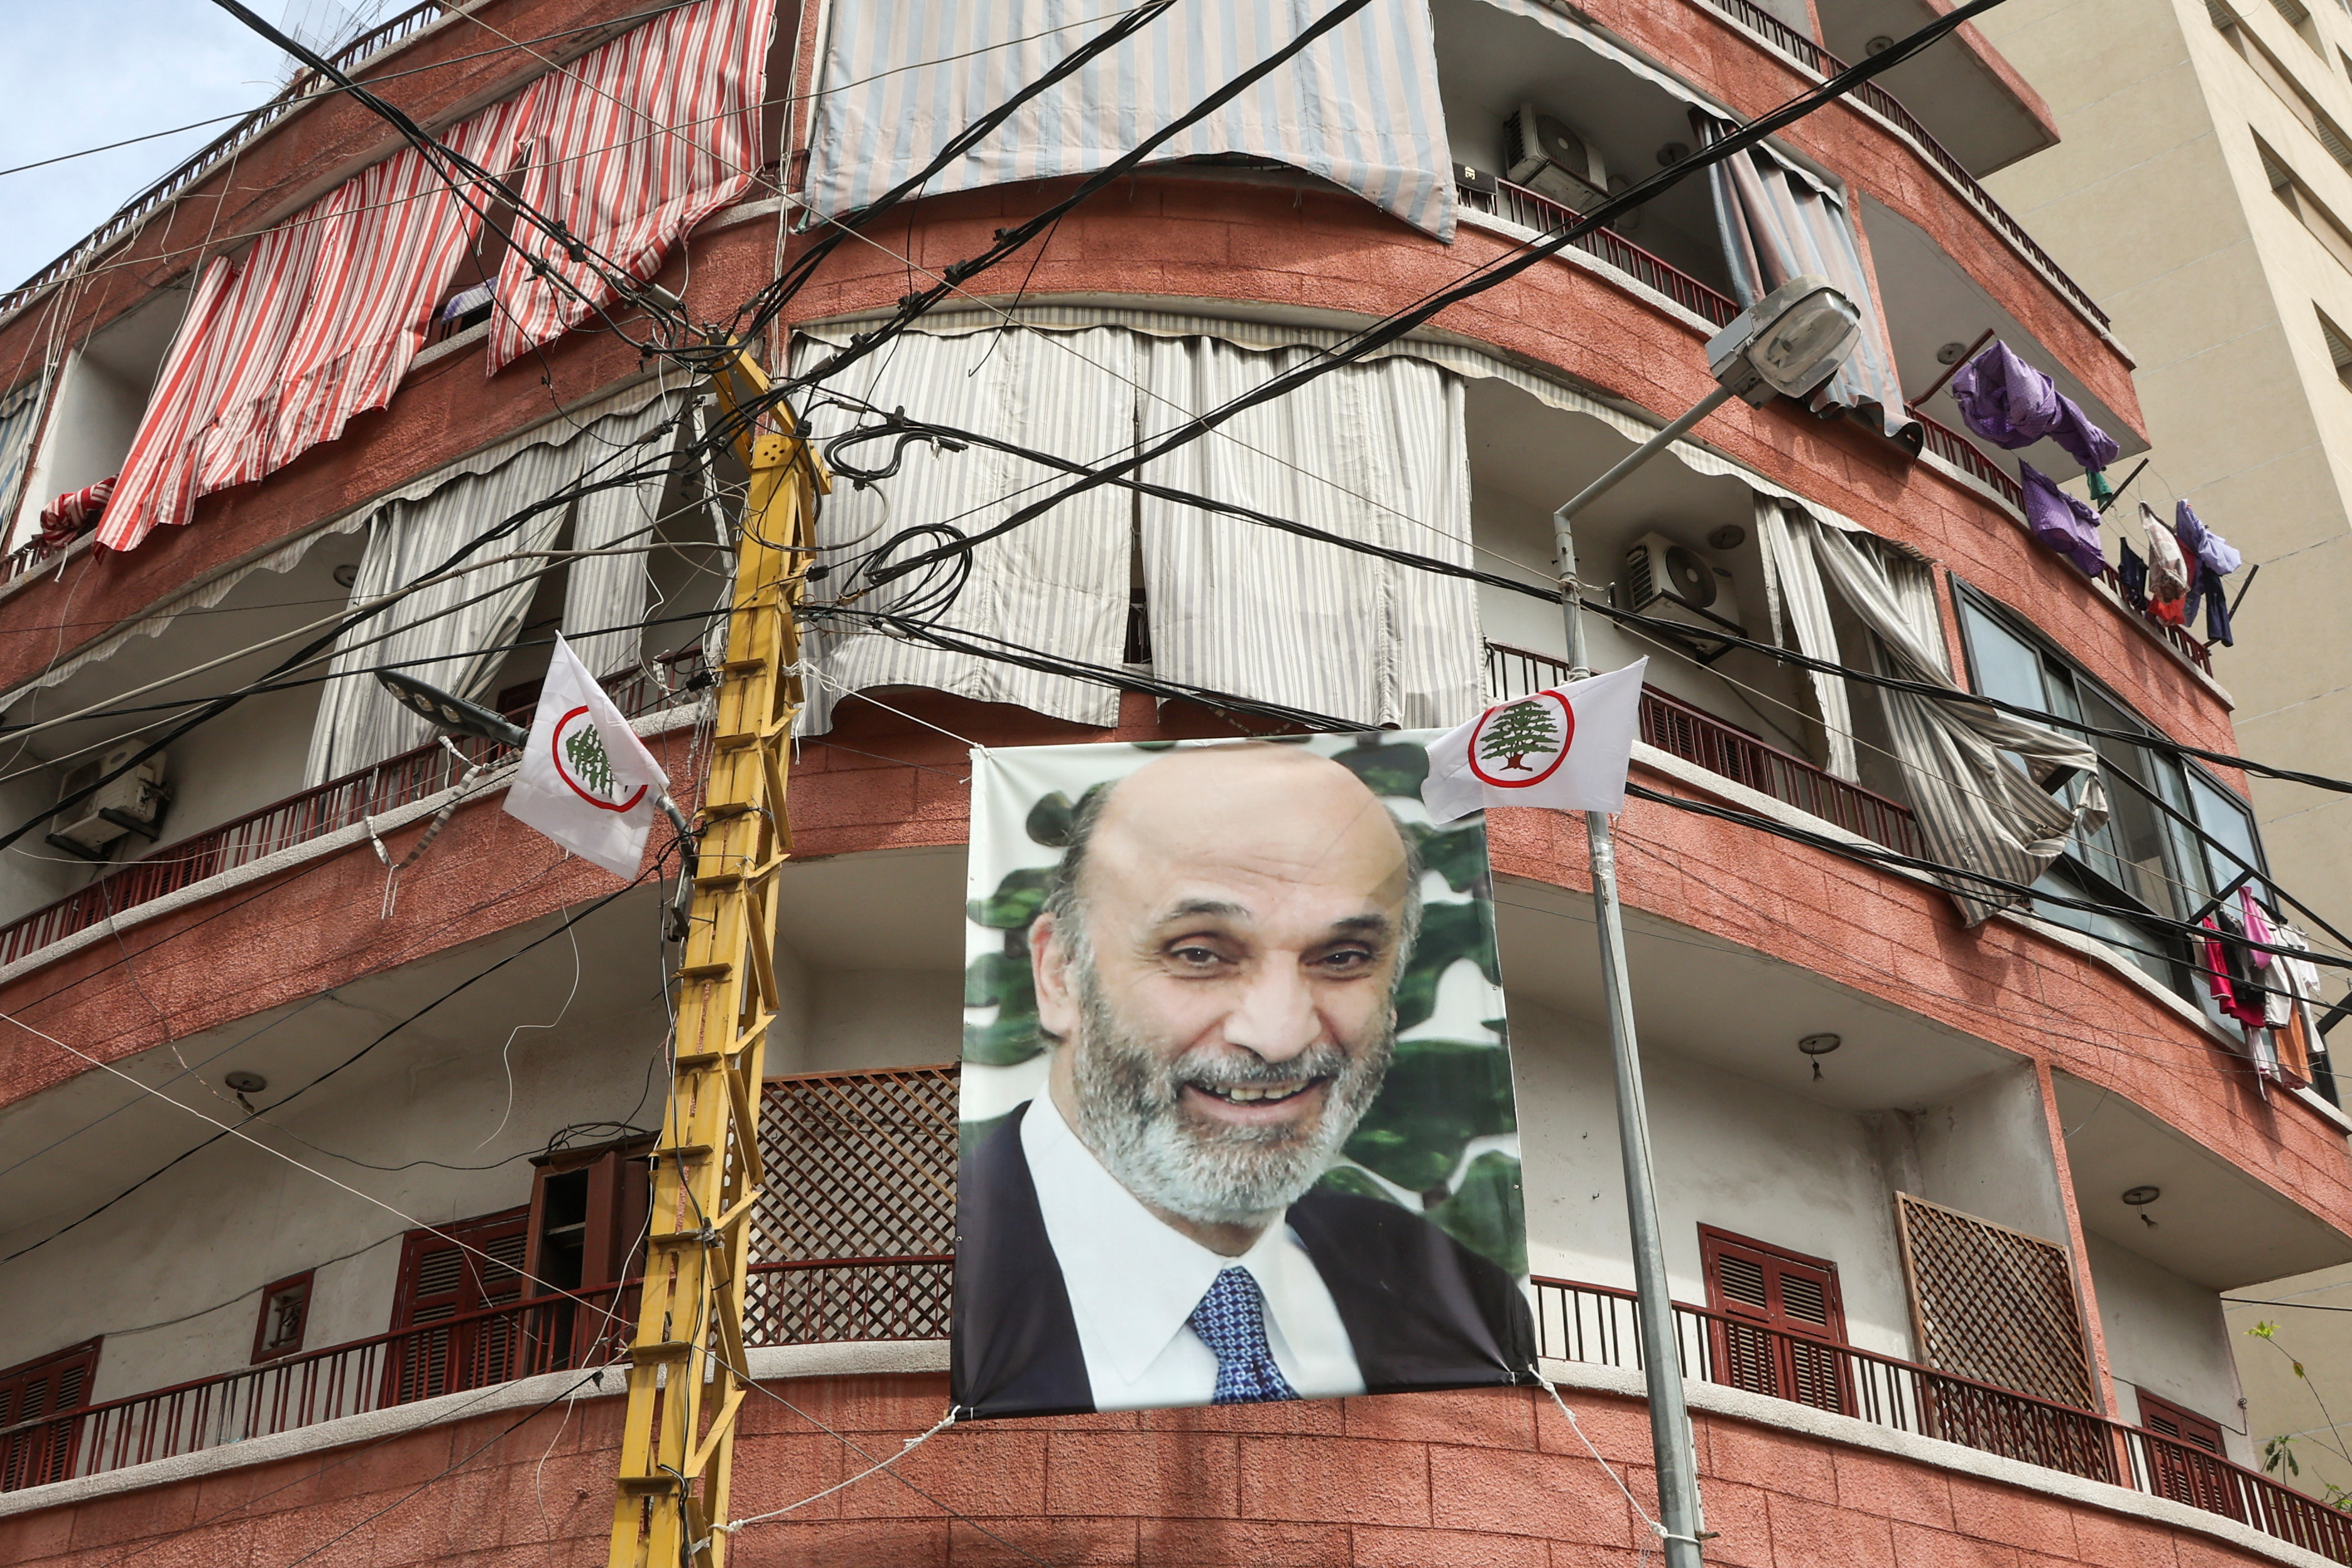 A banner depicting Samir Geagea, the leader of Lebanon's Christian Lebanese Forces (LF) party is seen in Ain el-Remmaneh